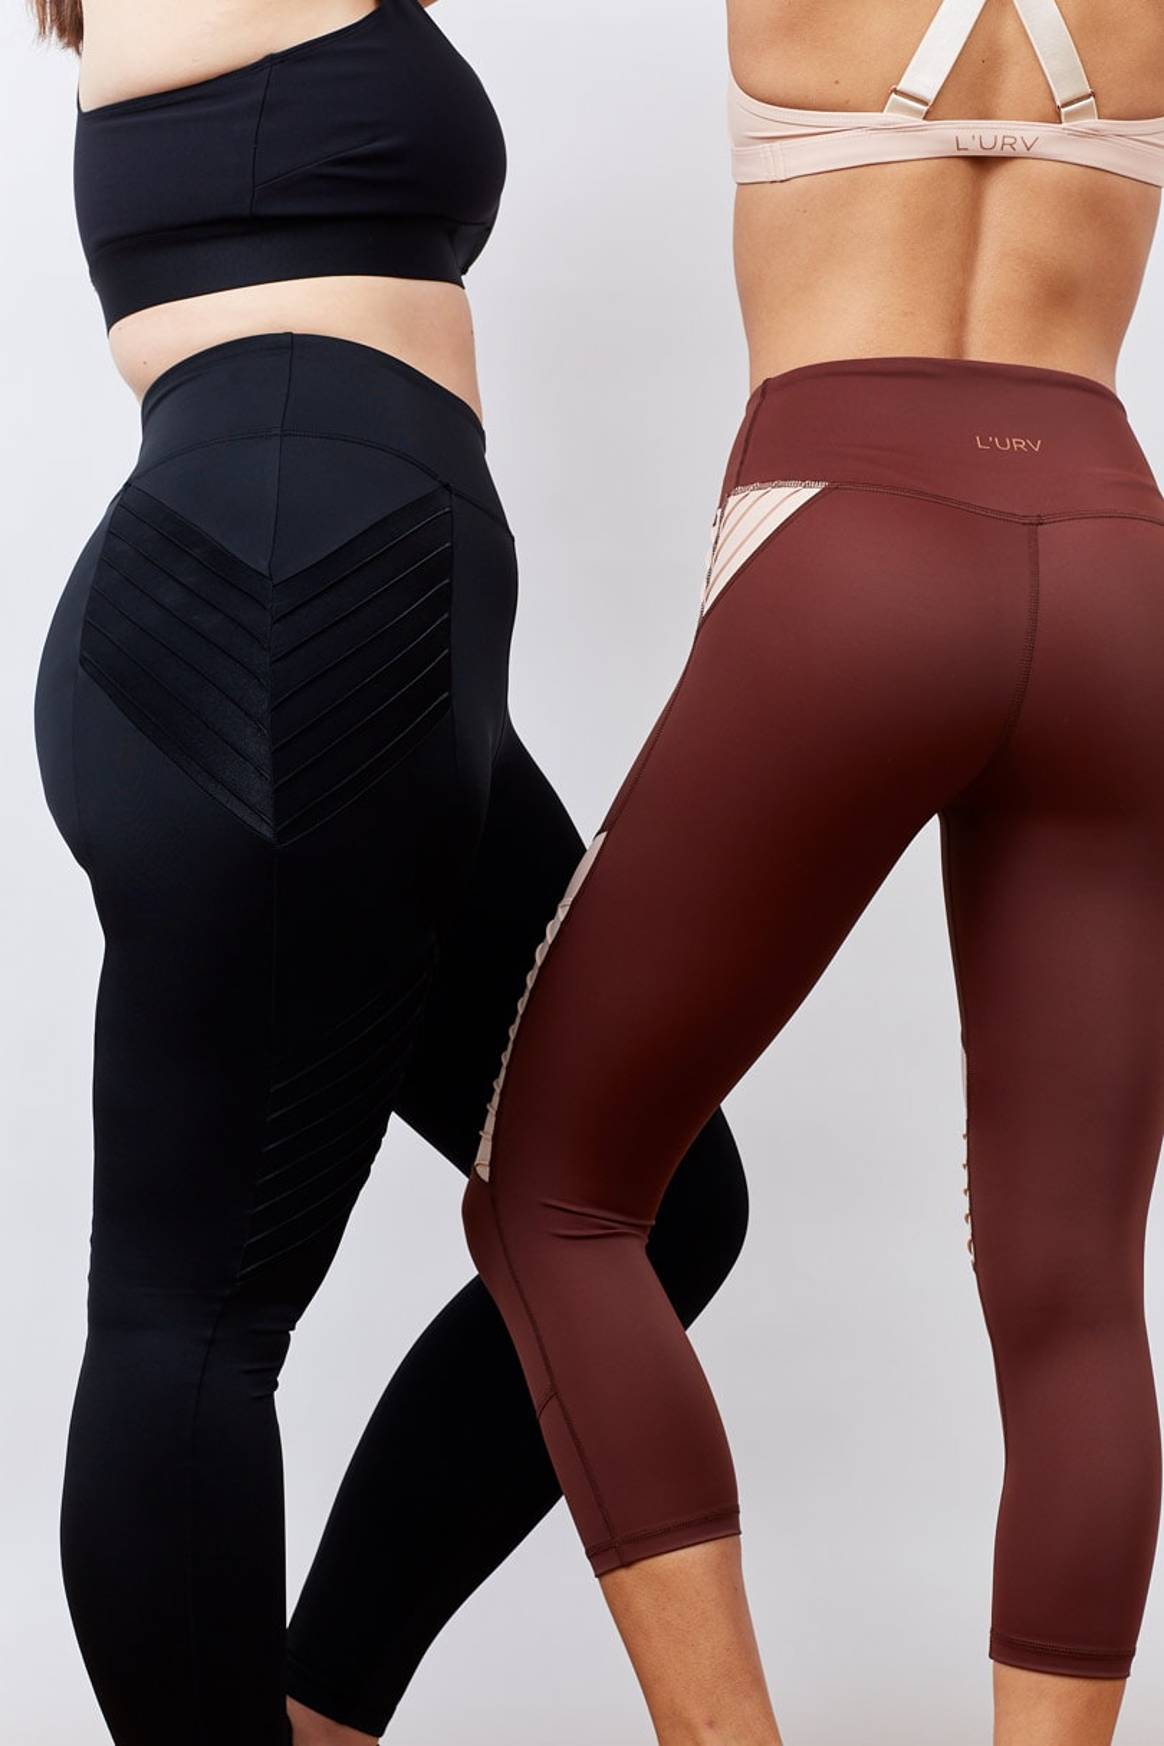 Fashercise launches Curve edit